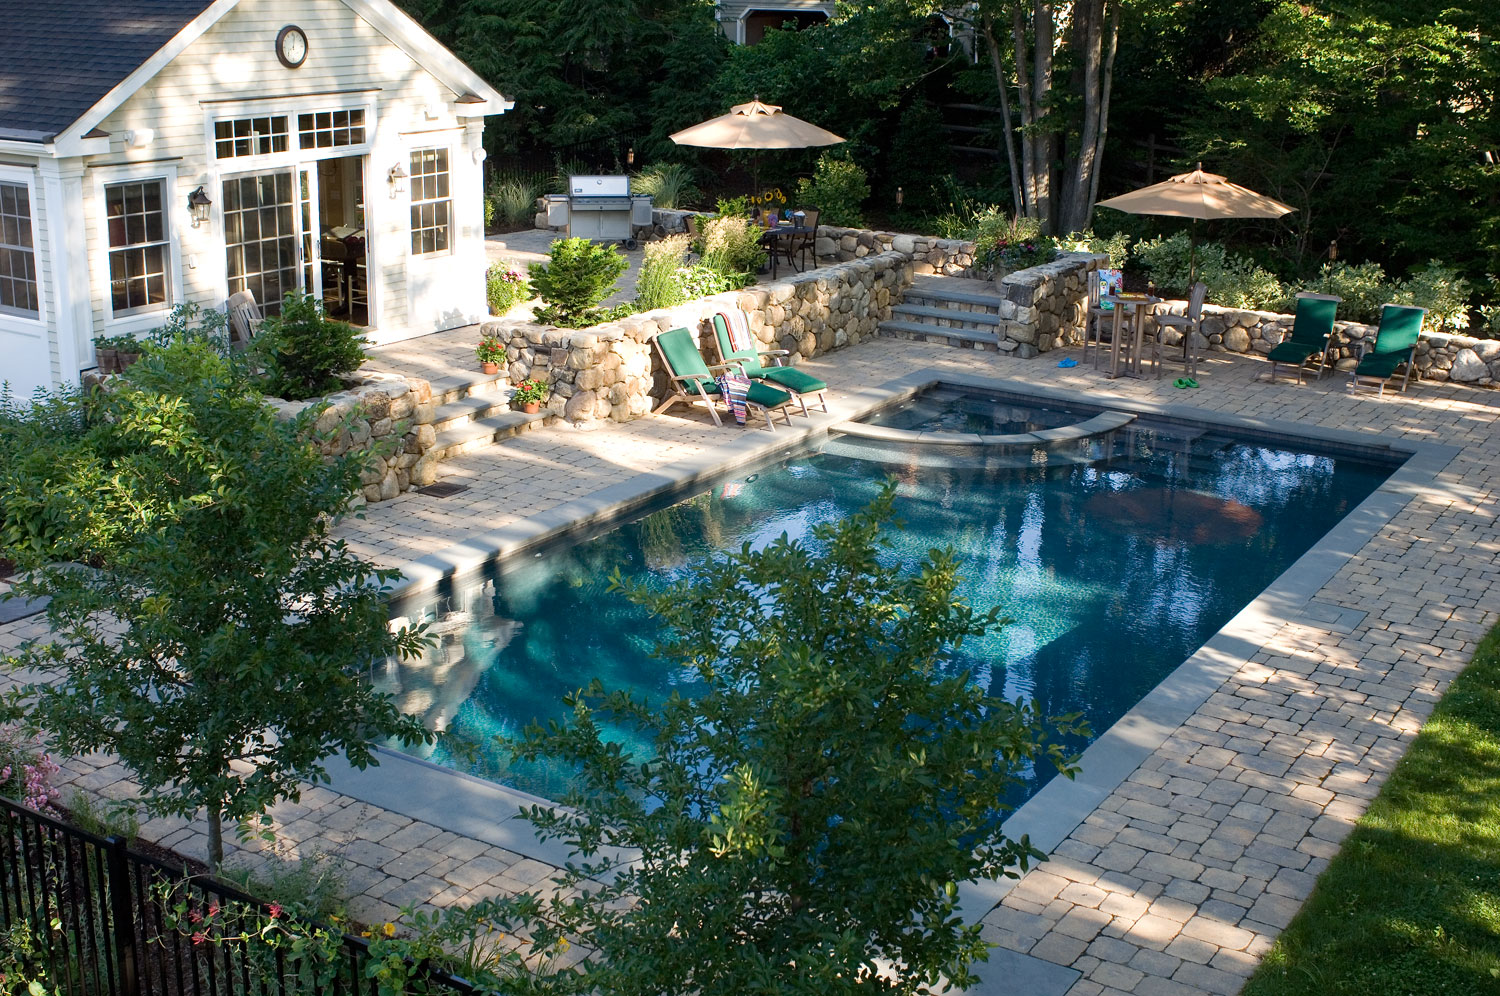 A serene backyard setting features an inviting rectangular swimming pool, stone patio, lush greenery, lounge chairs, and a quaint outbuilding.